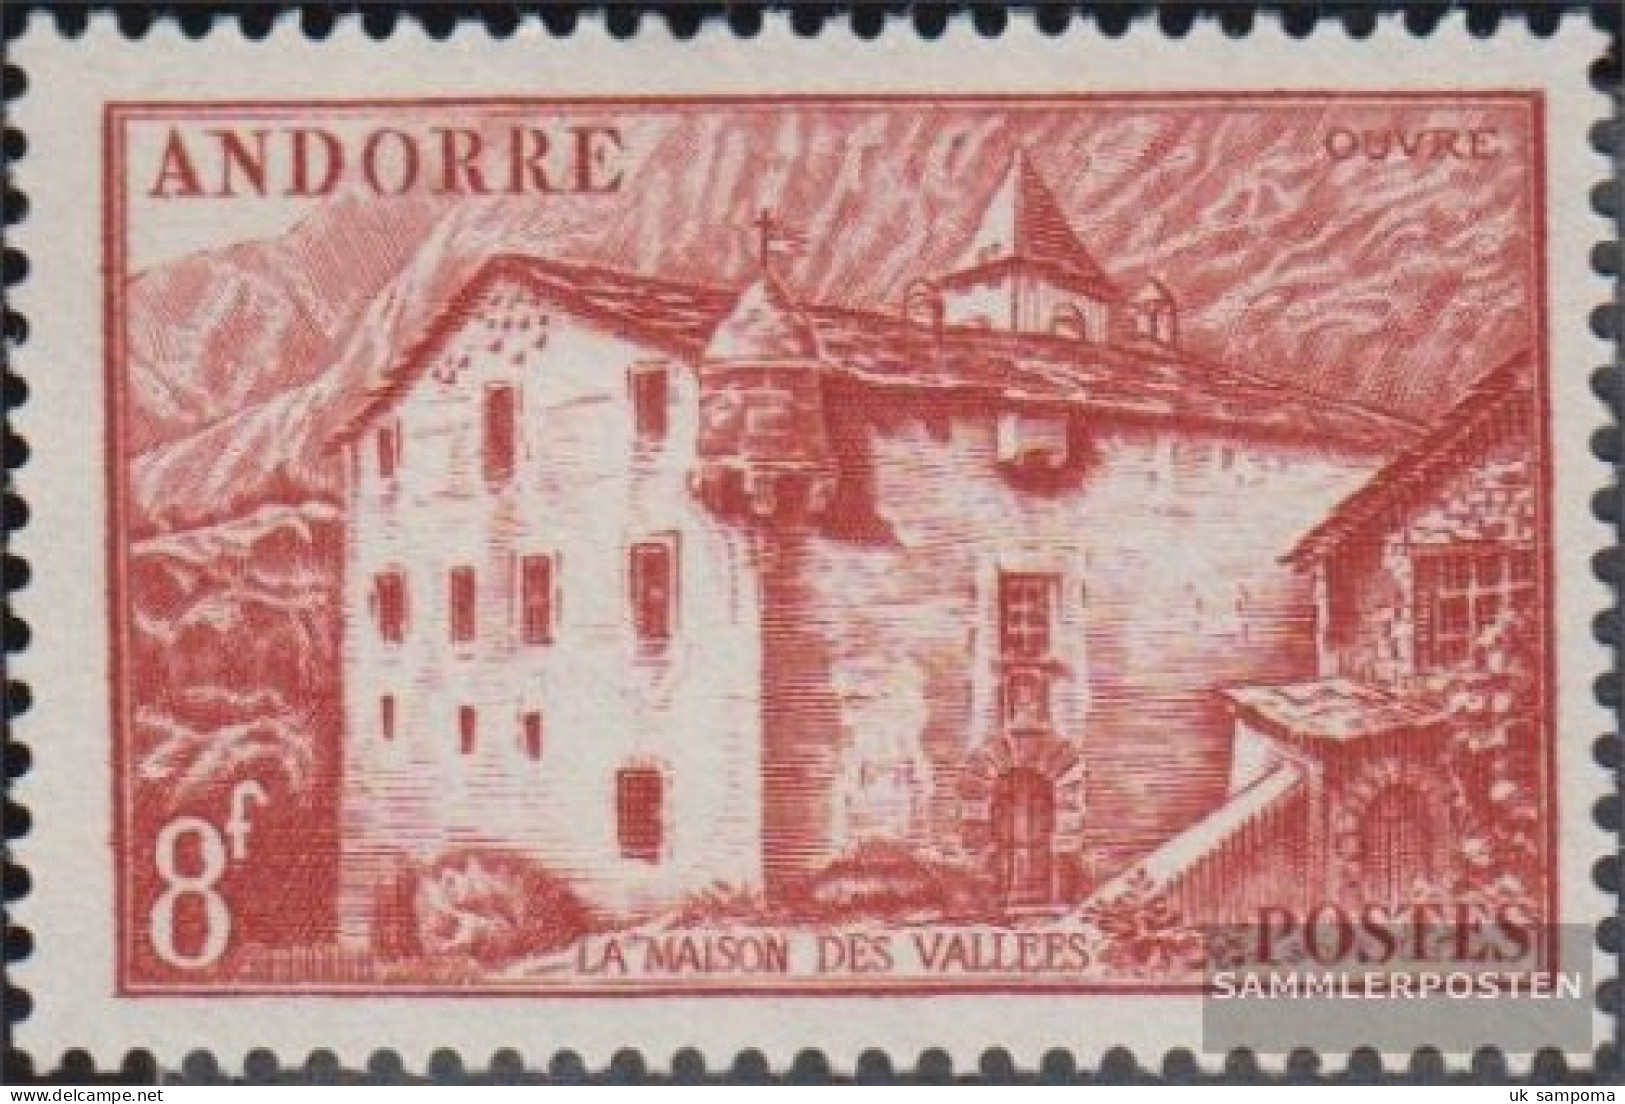 Andorra - French Post 124 Unmounted Mint / Never Hinged 1944 Landscapes - Carnets